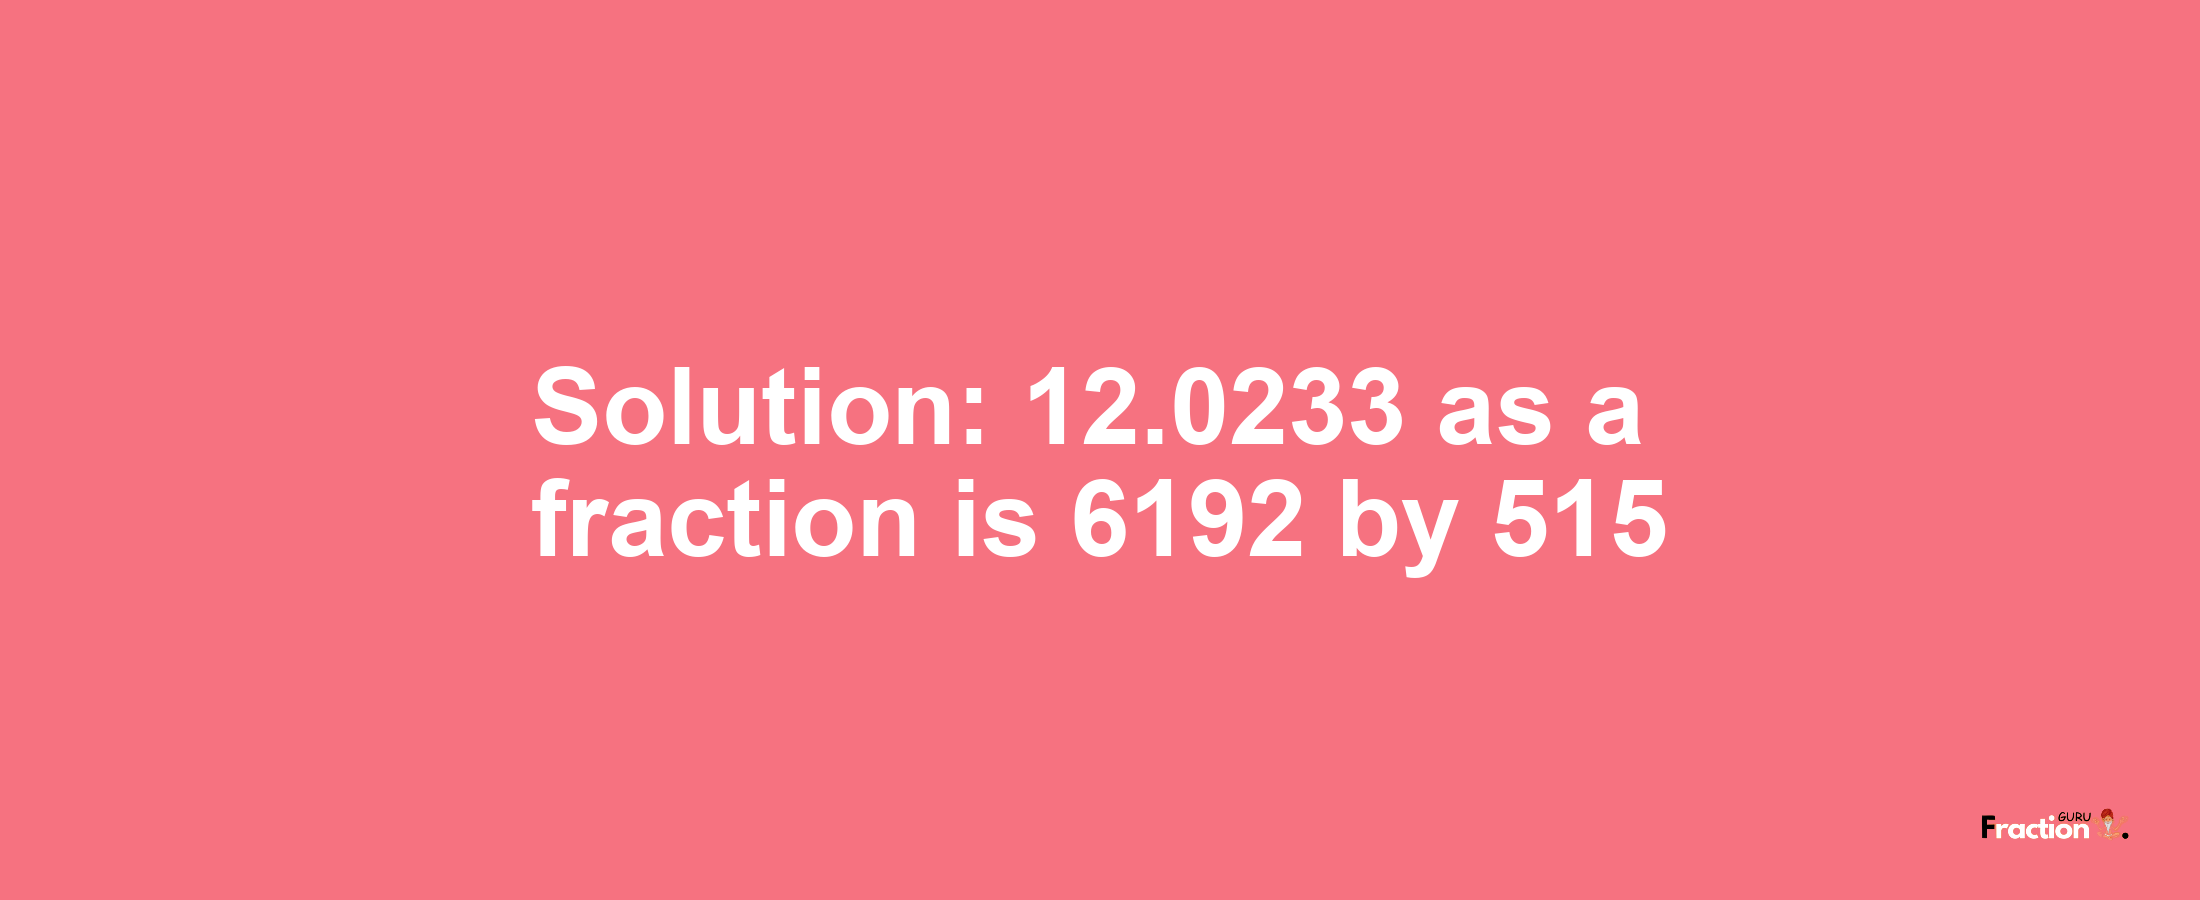 Solution:12.0233 as a fraction is 6192/515